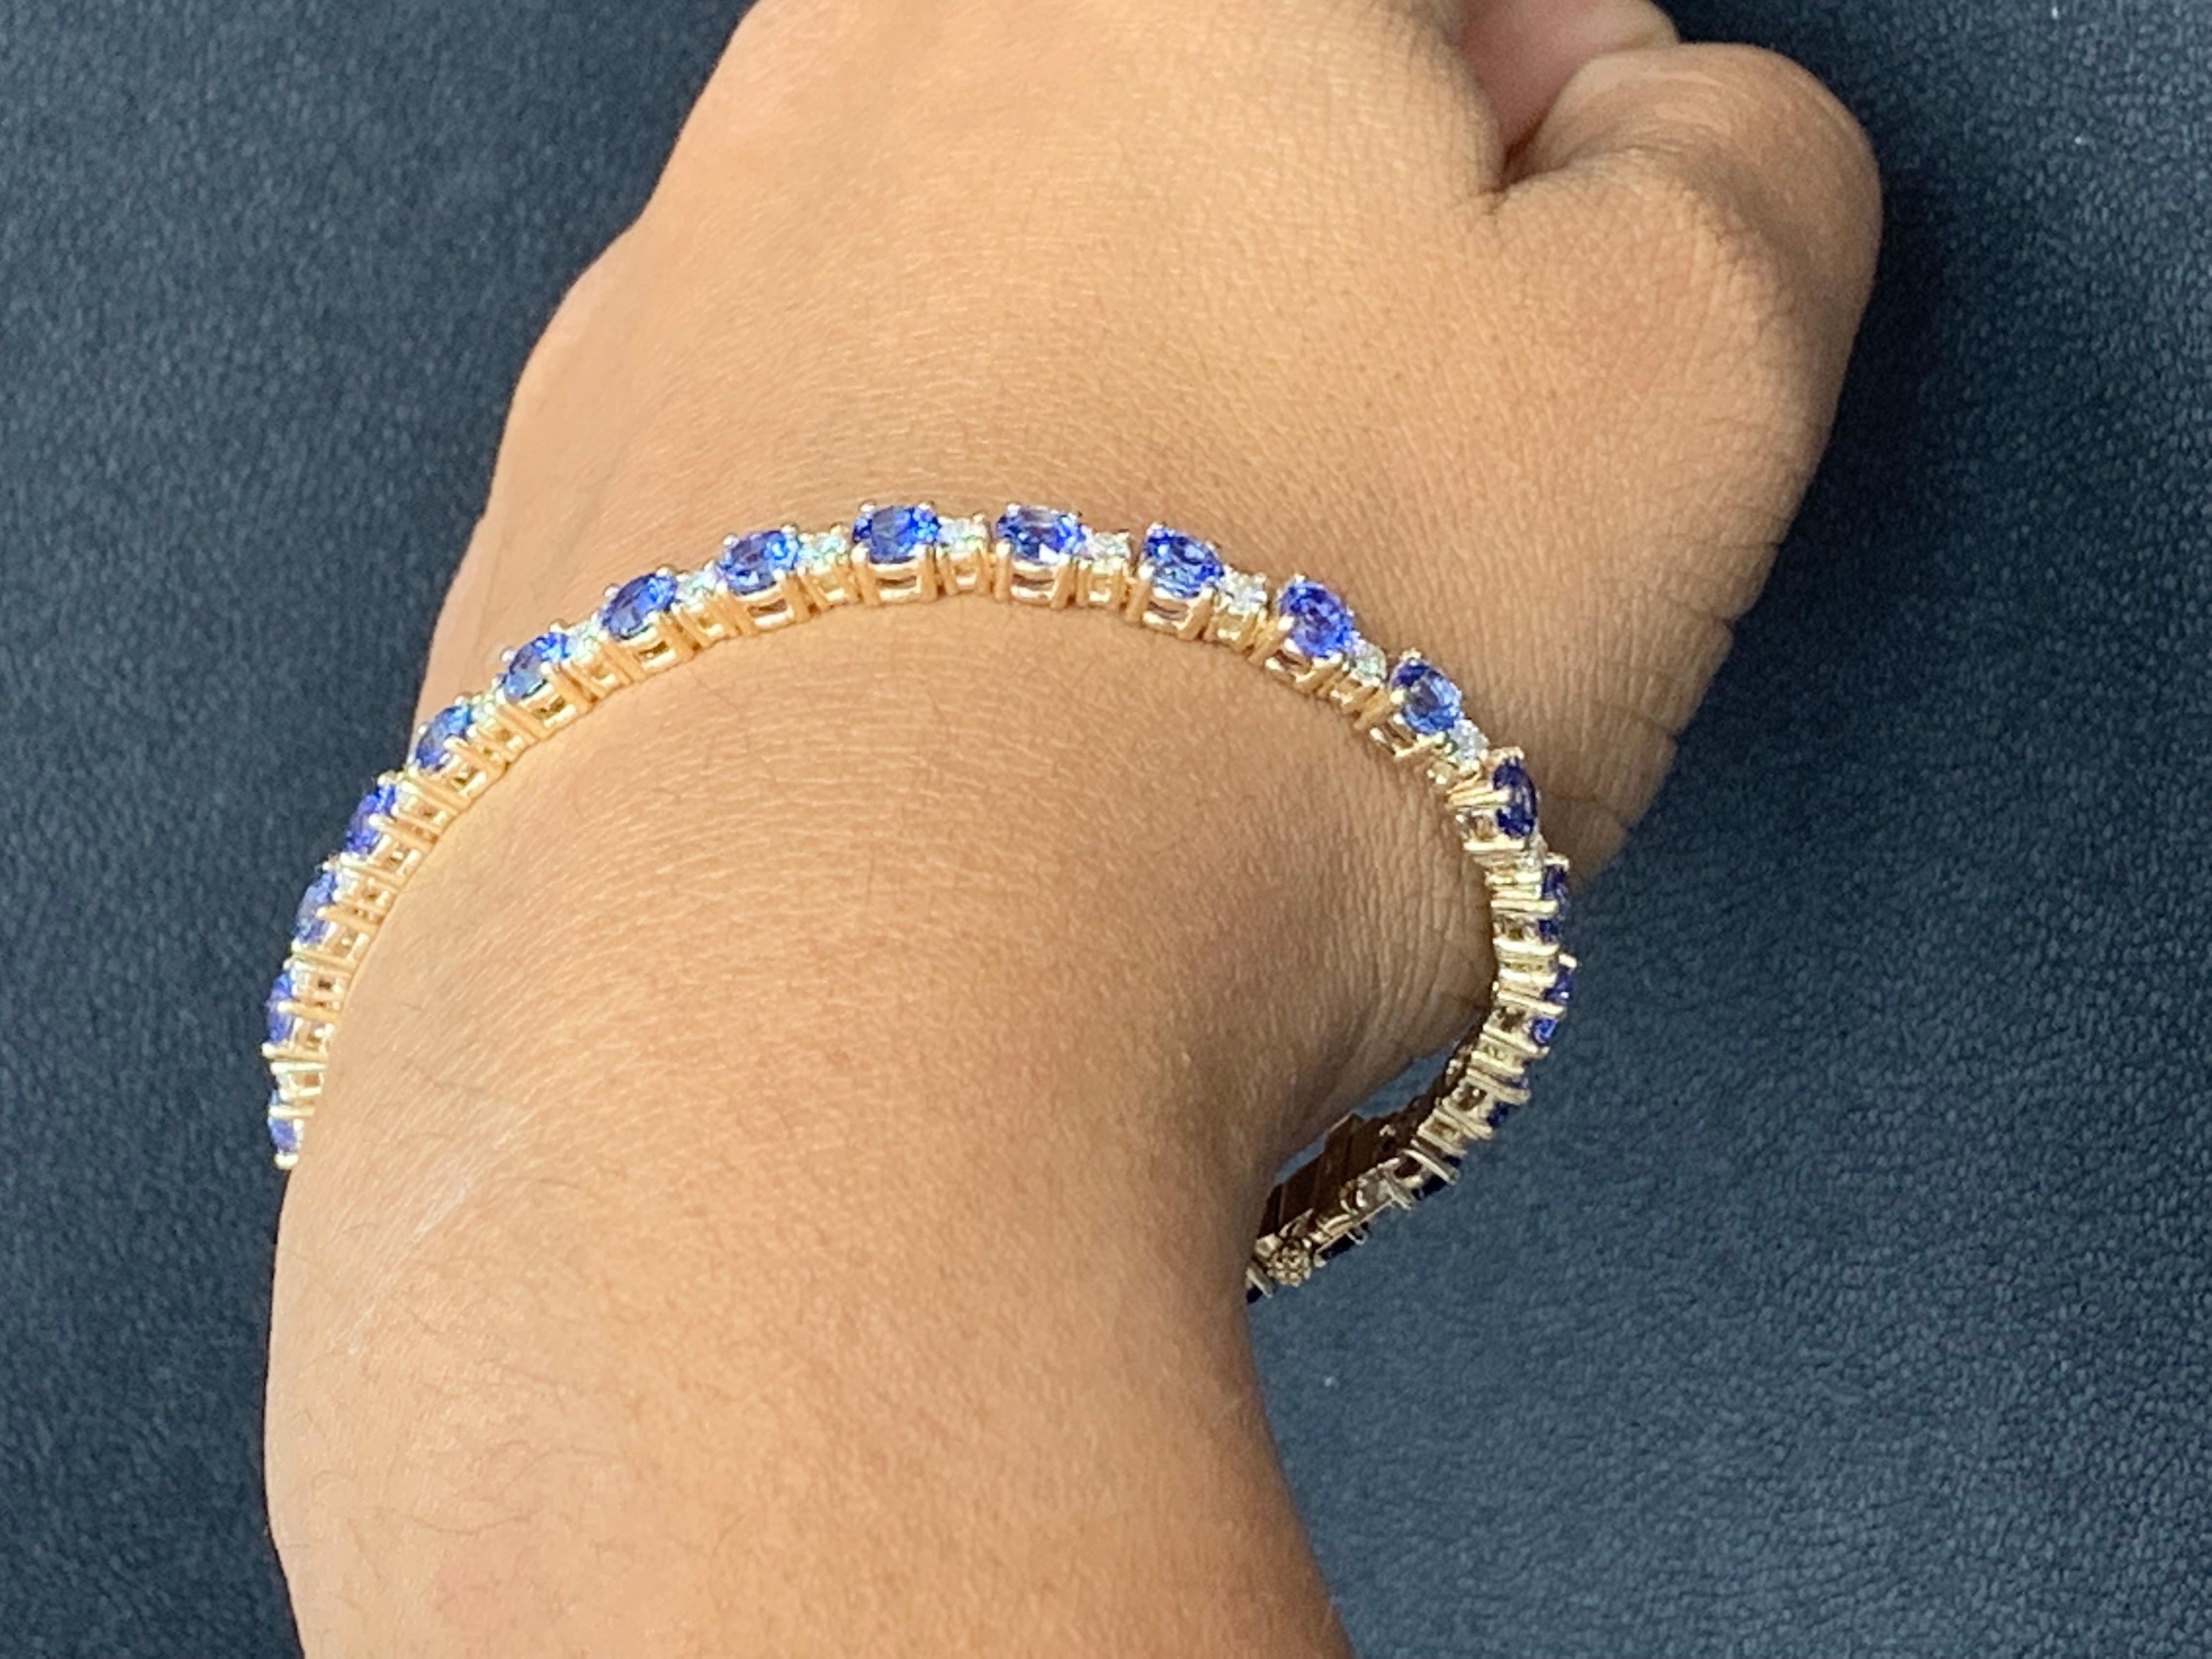 7.80 Carat Alternating Sapphire and Diamond Tennis Bracelet in 14K Yellow Gold For Sale 5